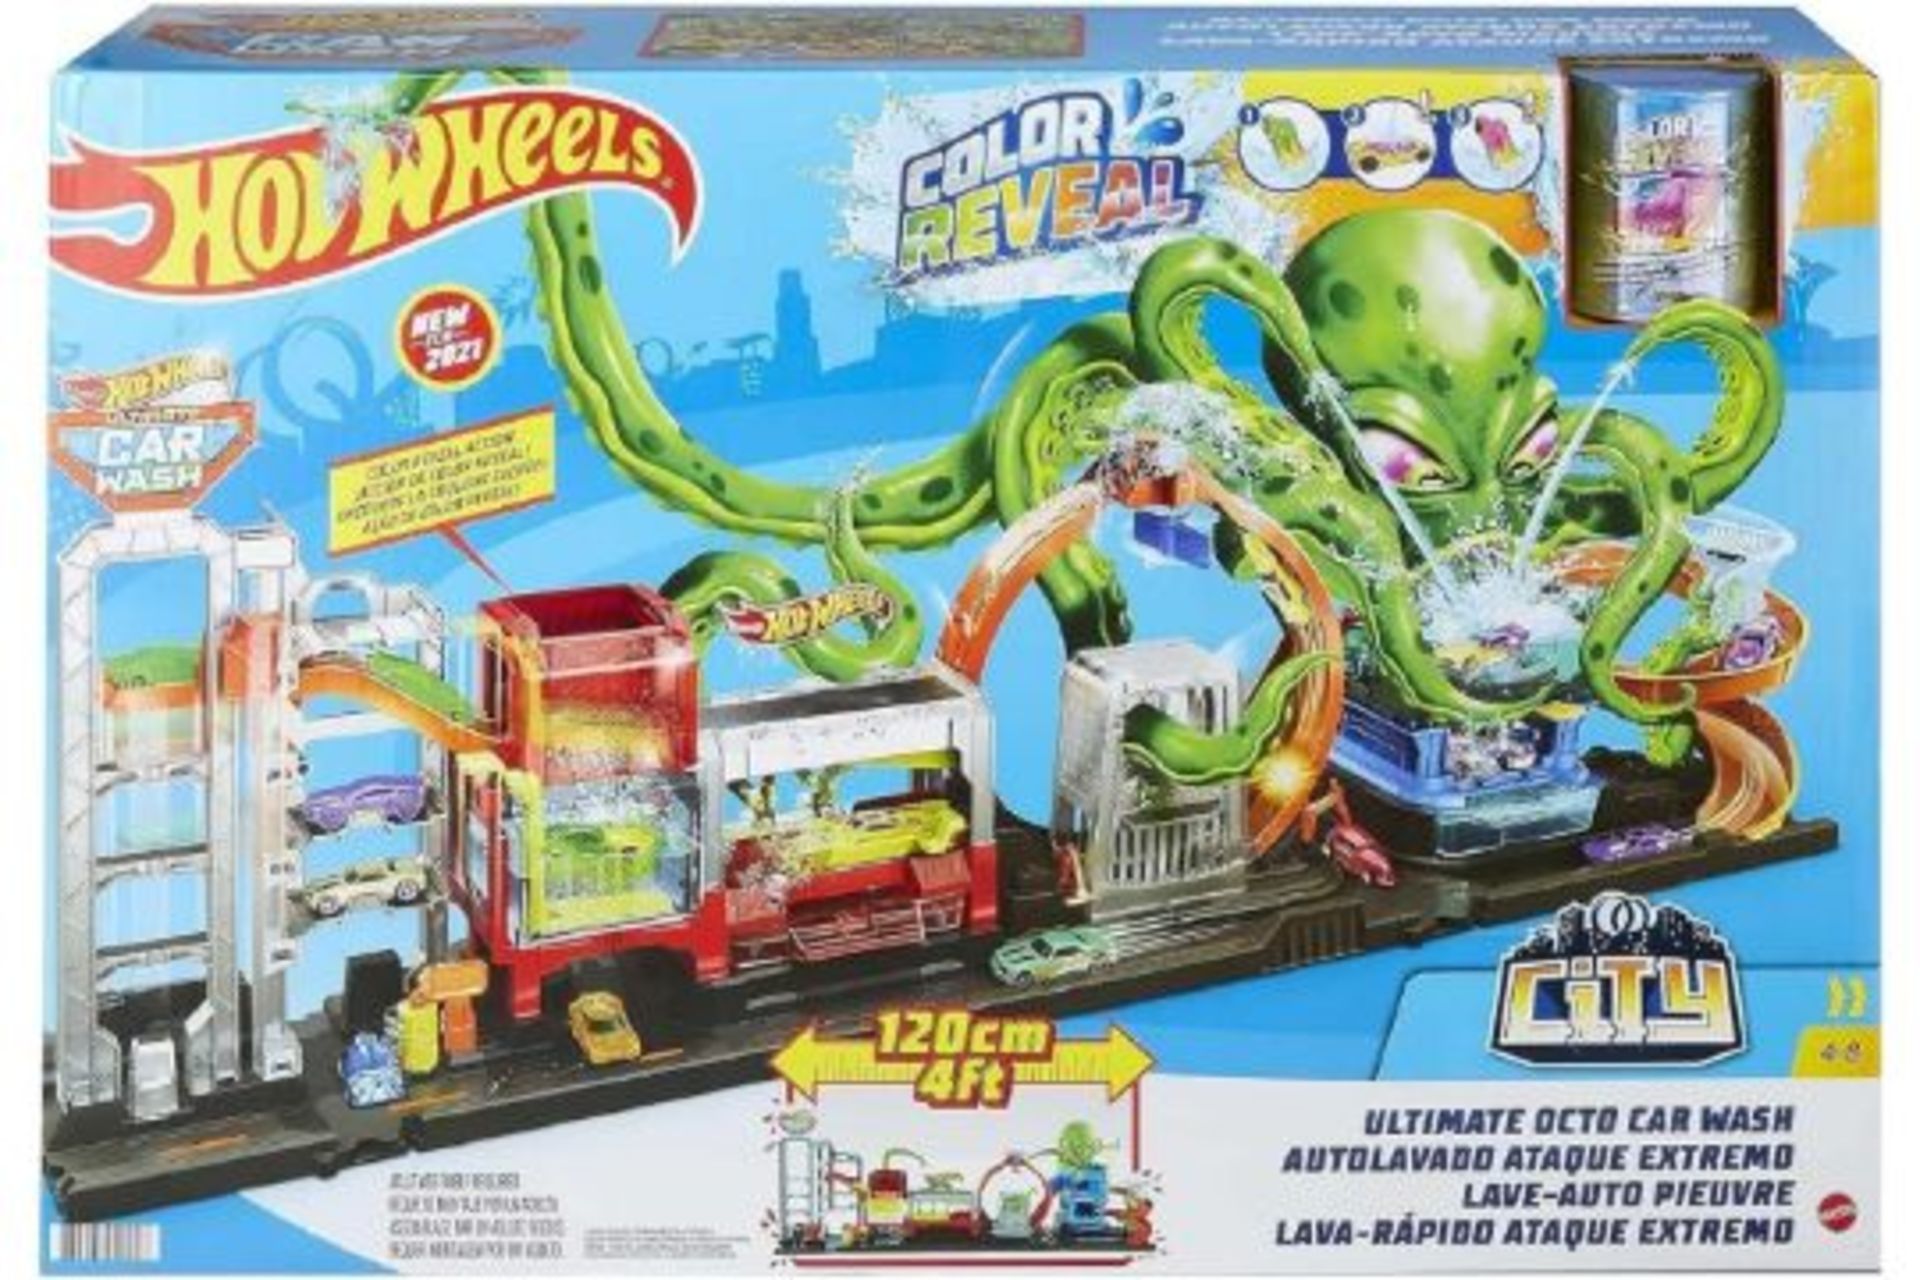 BRAND NEW HOT WHEELS CITY ULTIMATE OCTO CAR WASH PLAYSET